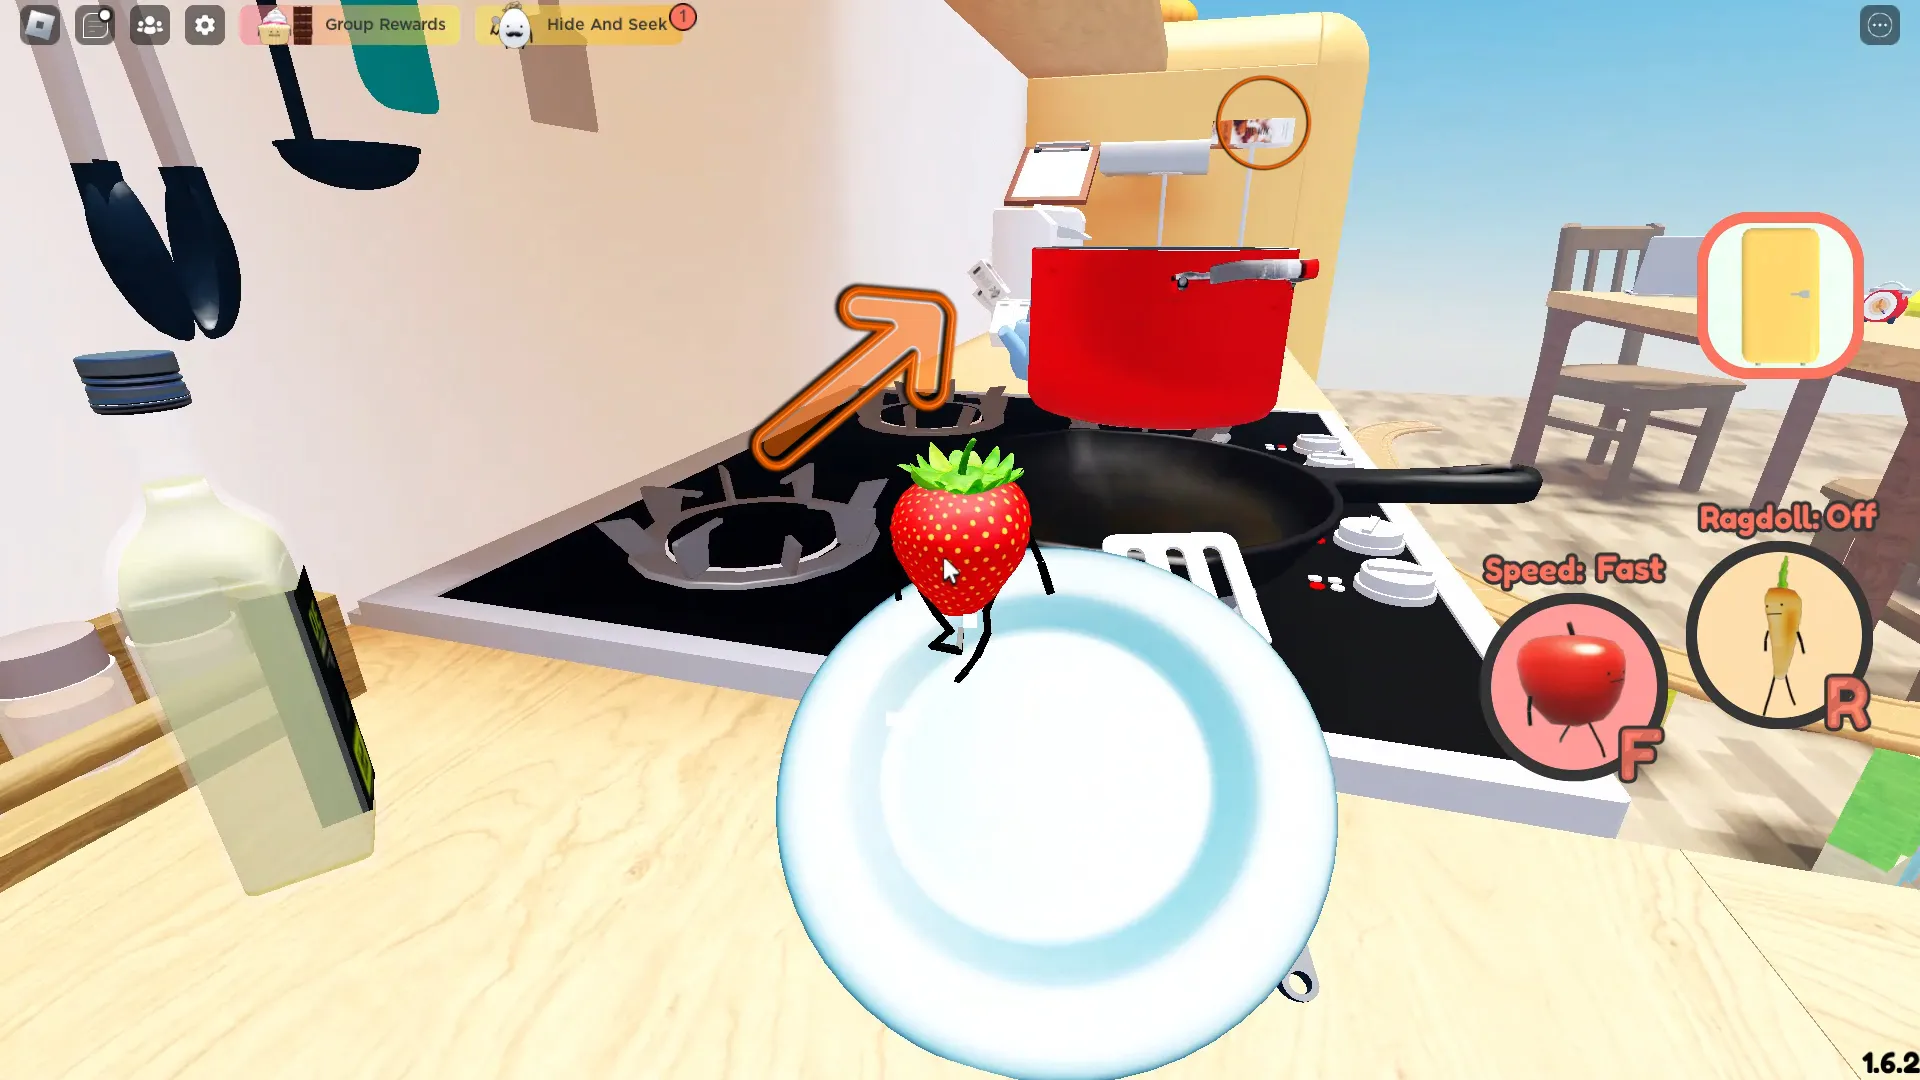 Roblox: Secret Staycation, the way to the pie box using Strawberry